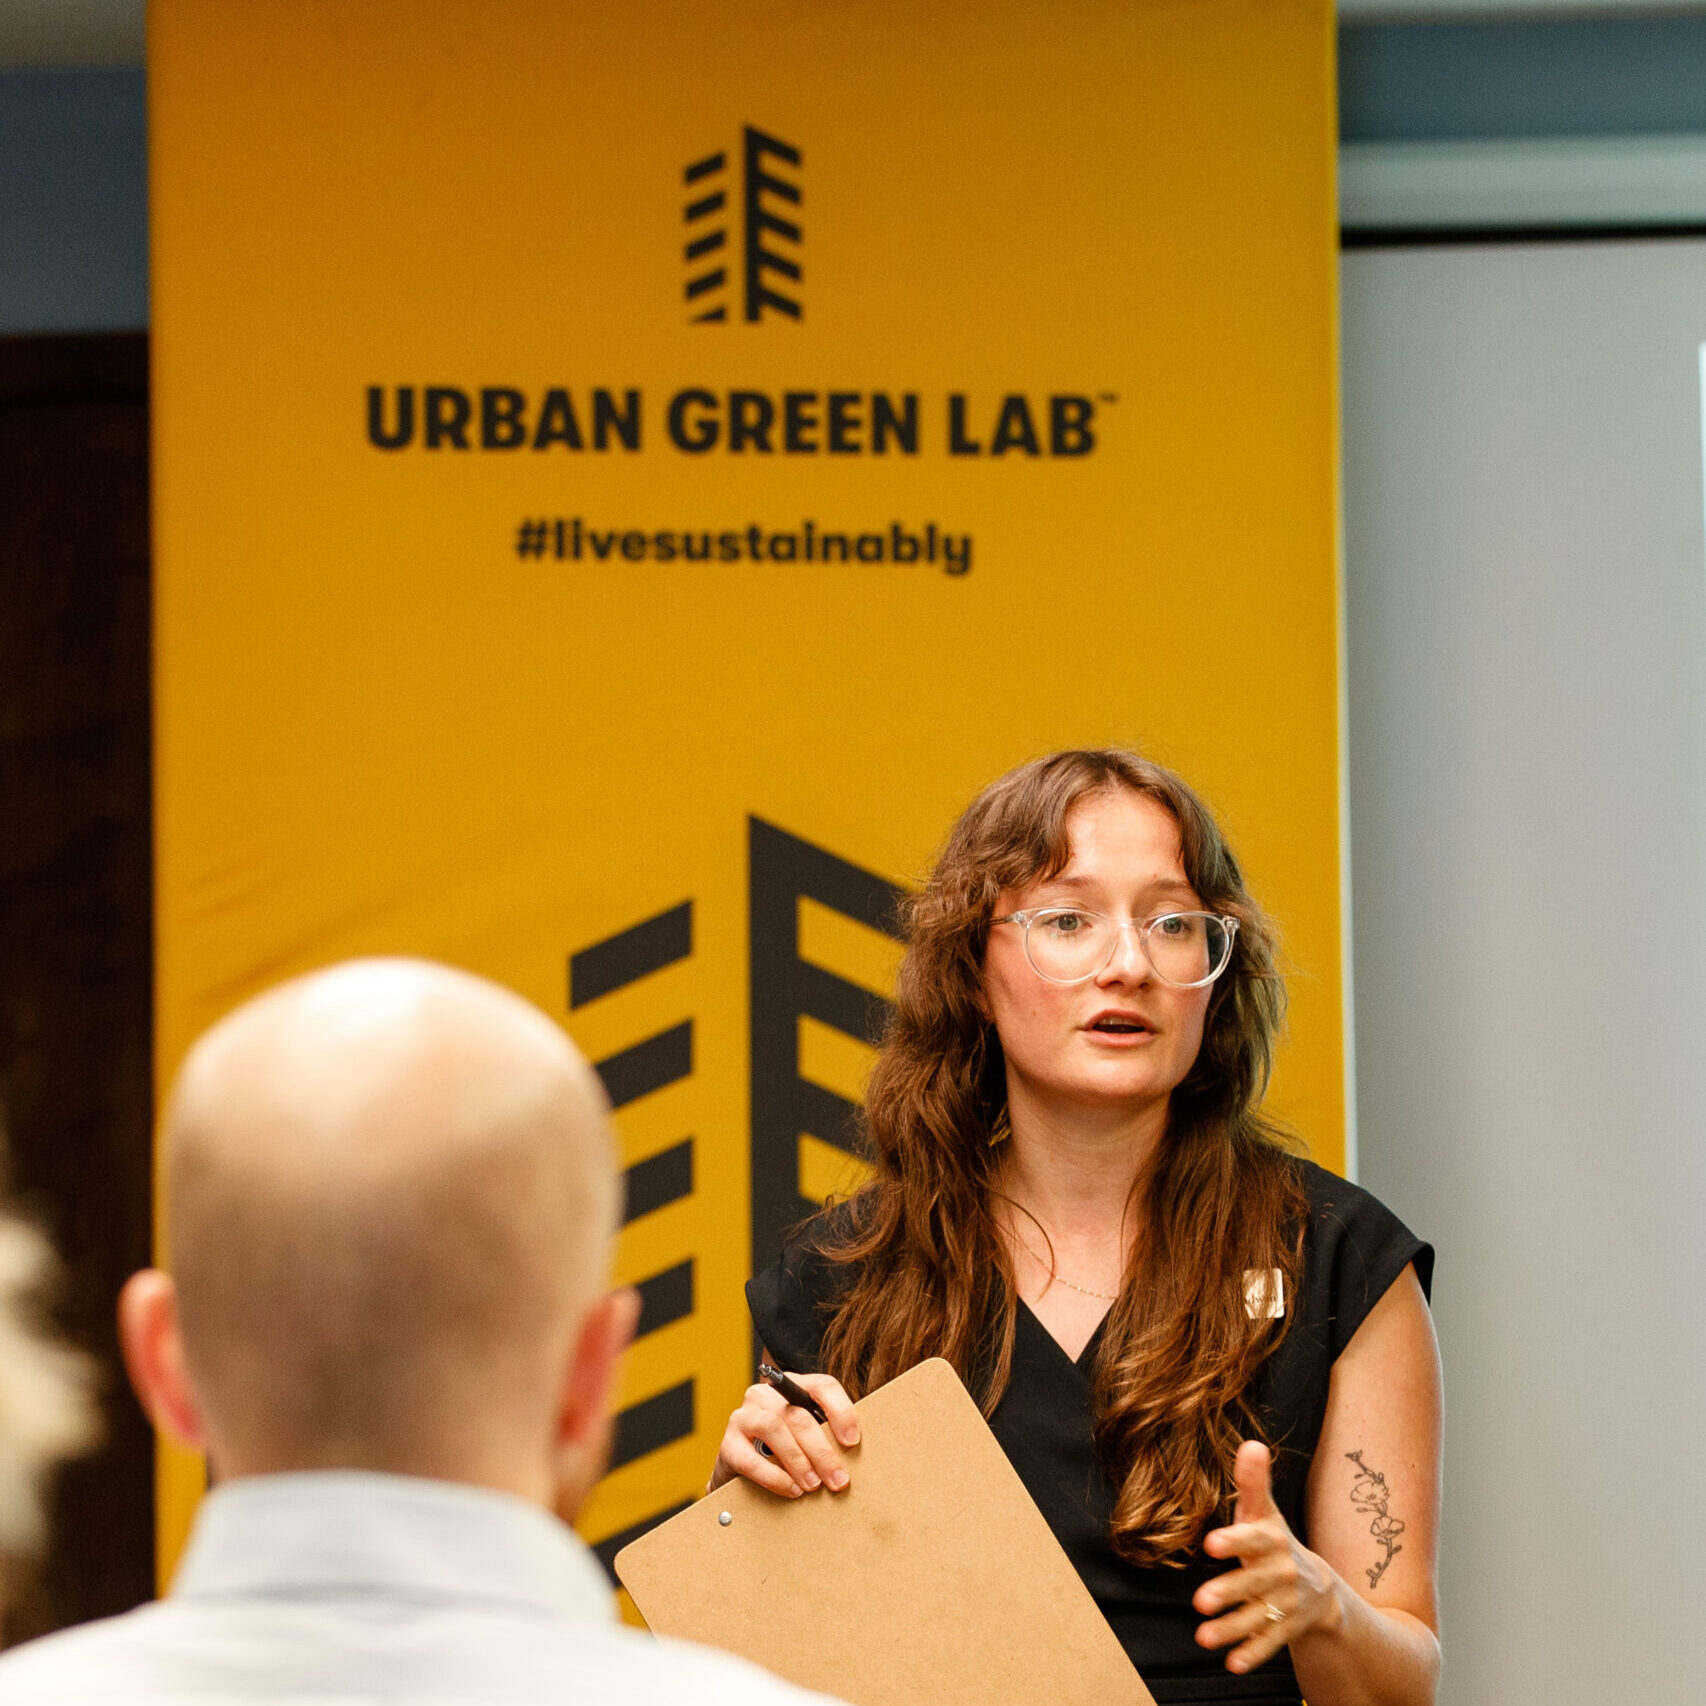 Woman presents to workplaces on sustainability in front of an Urban Green Lab sign